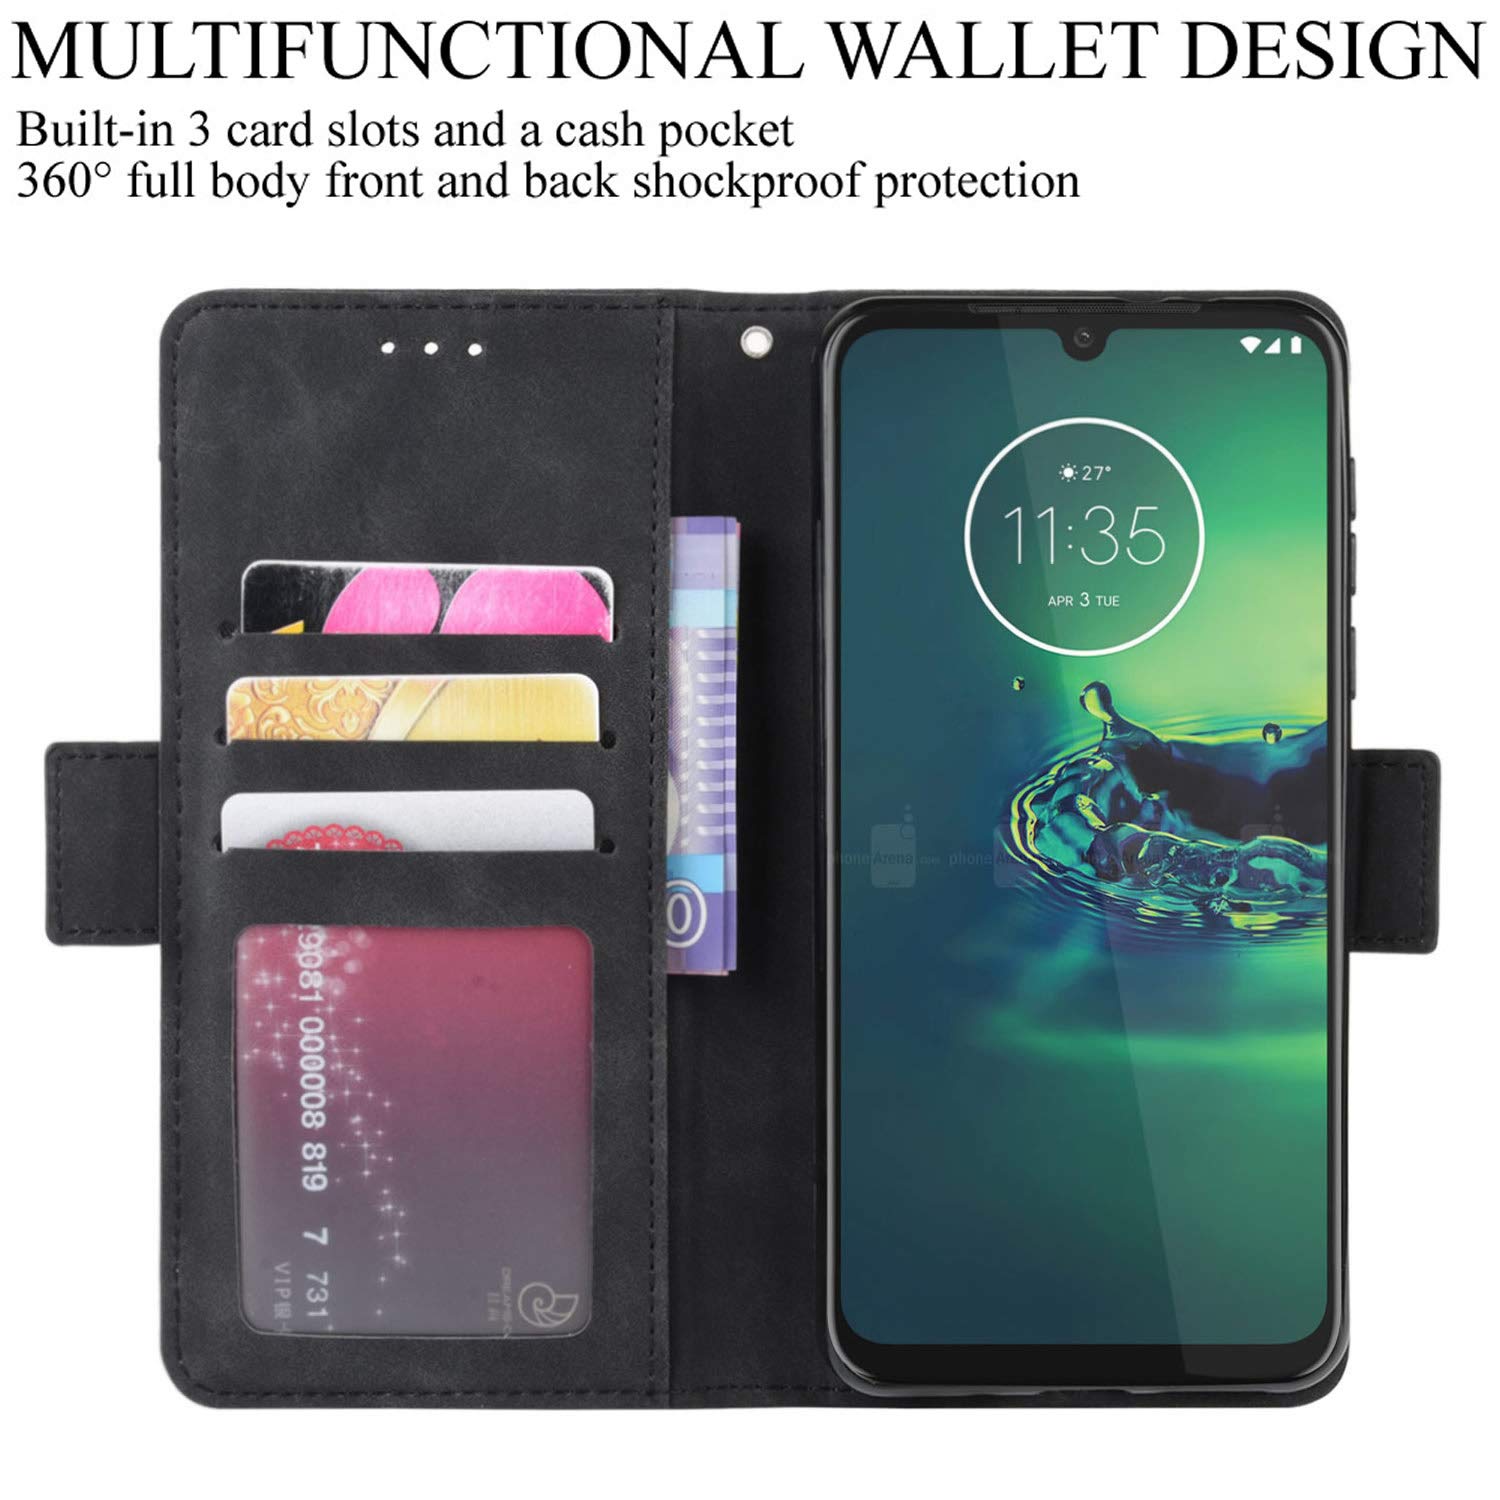 HualuBro Boost Mobile Celero 5G Plus Case, Magnetic Full Body Protection Shockproof Flip Leather Wallet Case Cover with Card Holder for Boost Mobile Celero 5G Plus / 5G+ Phone Case (Black)